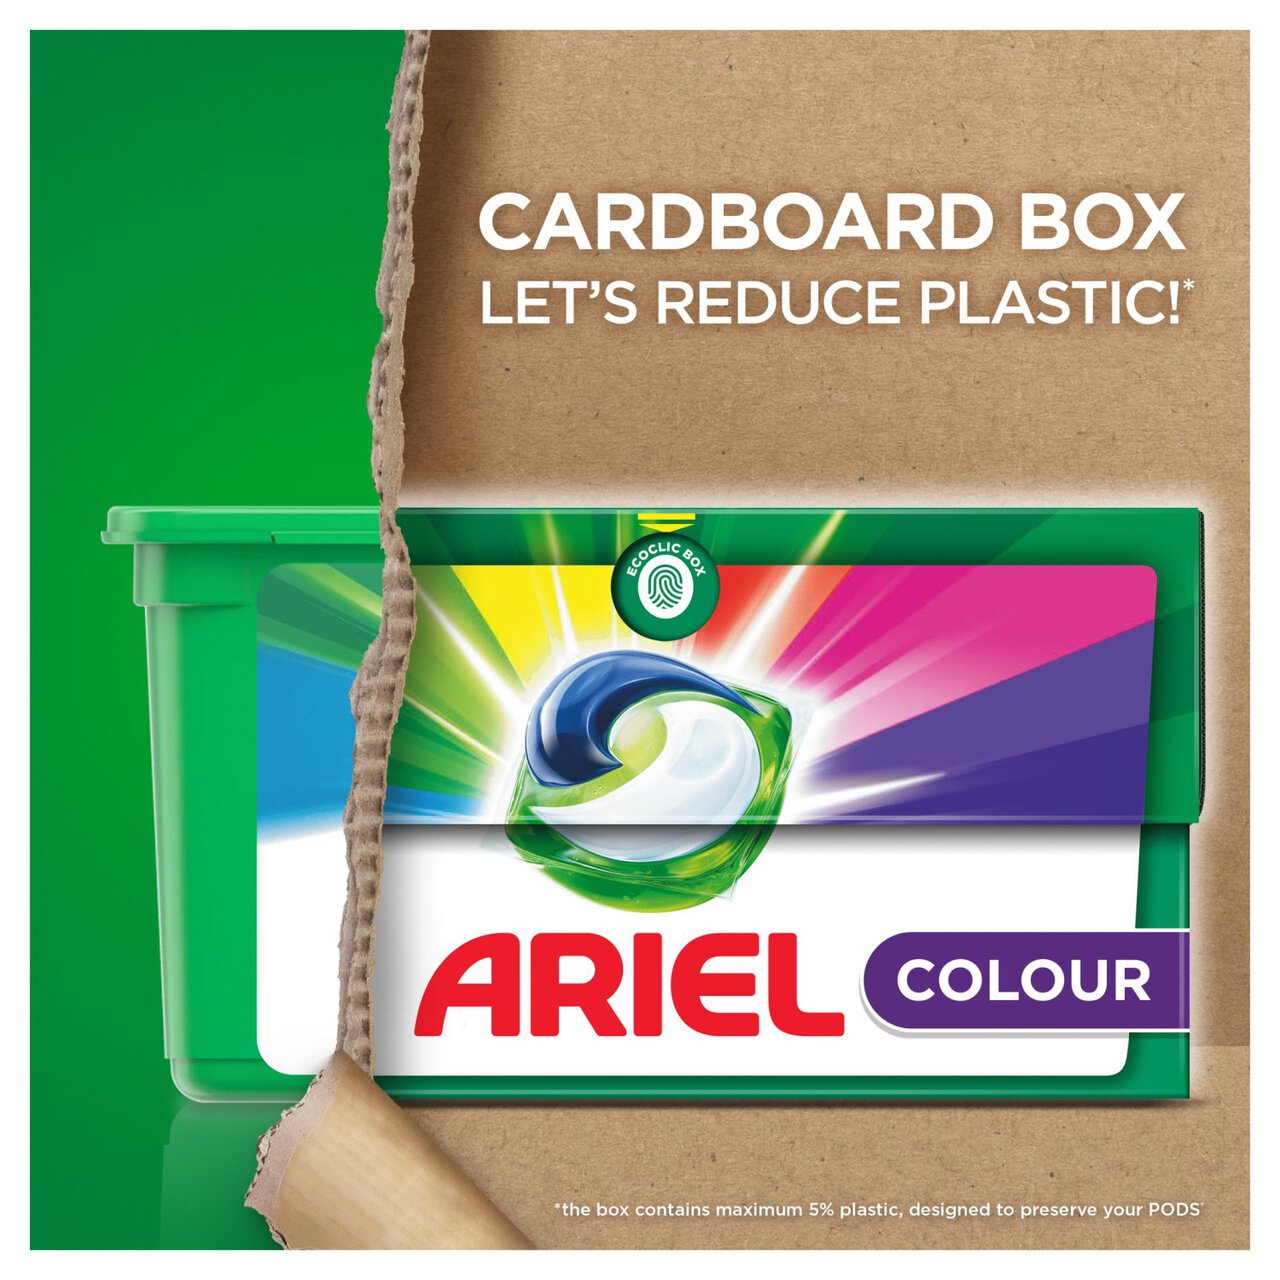 Ariel 3in1 Colour Pods Washing Capsules 25 Washes 25 per pack